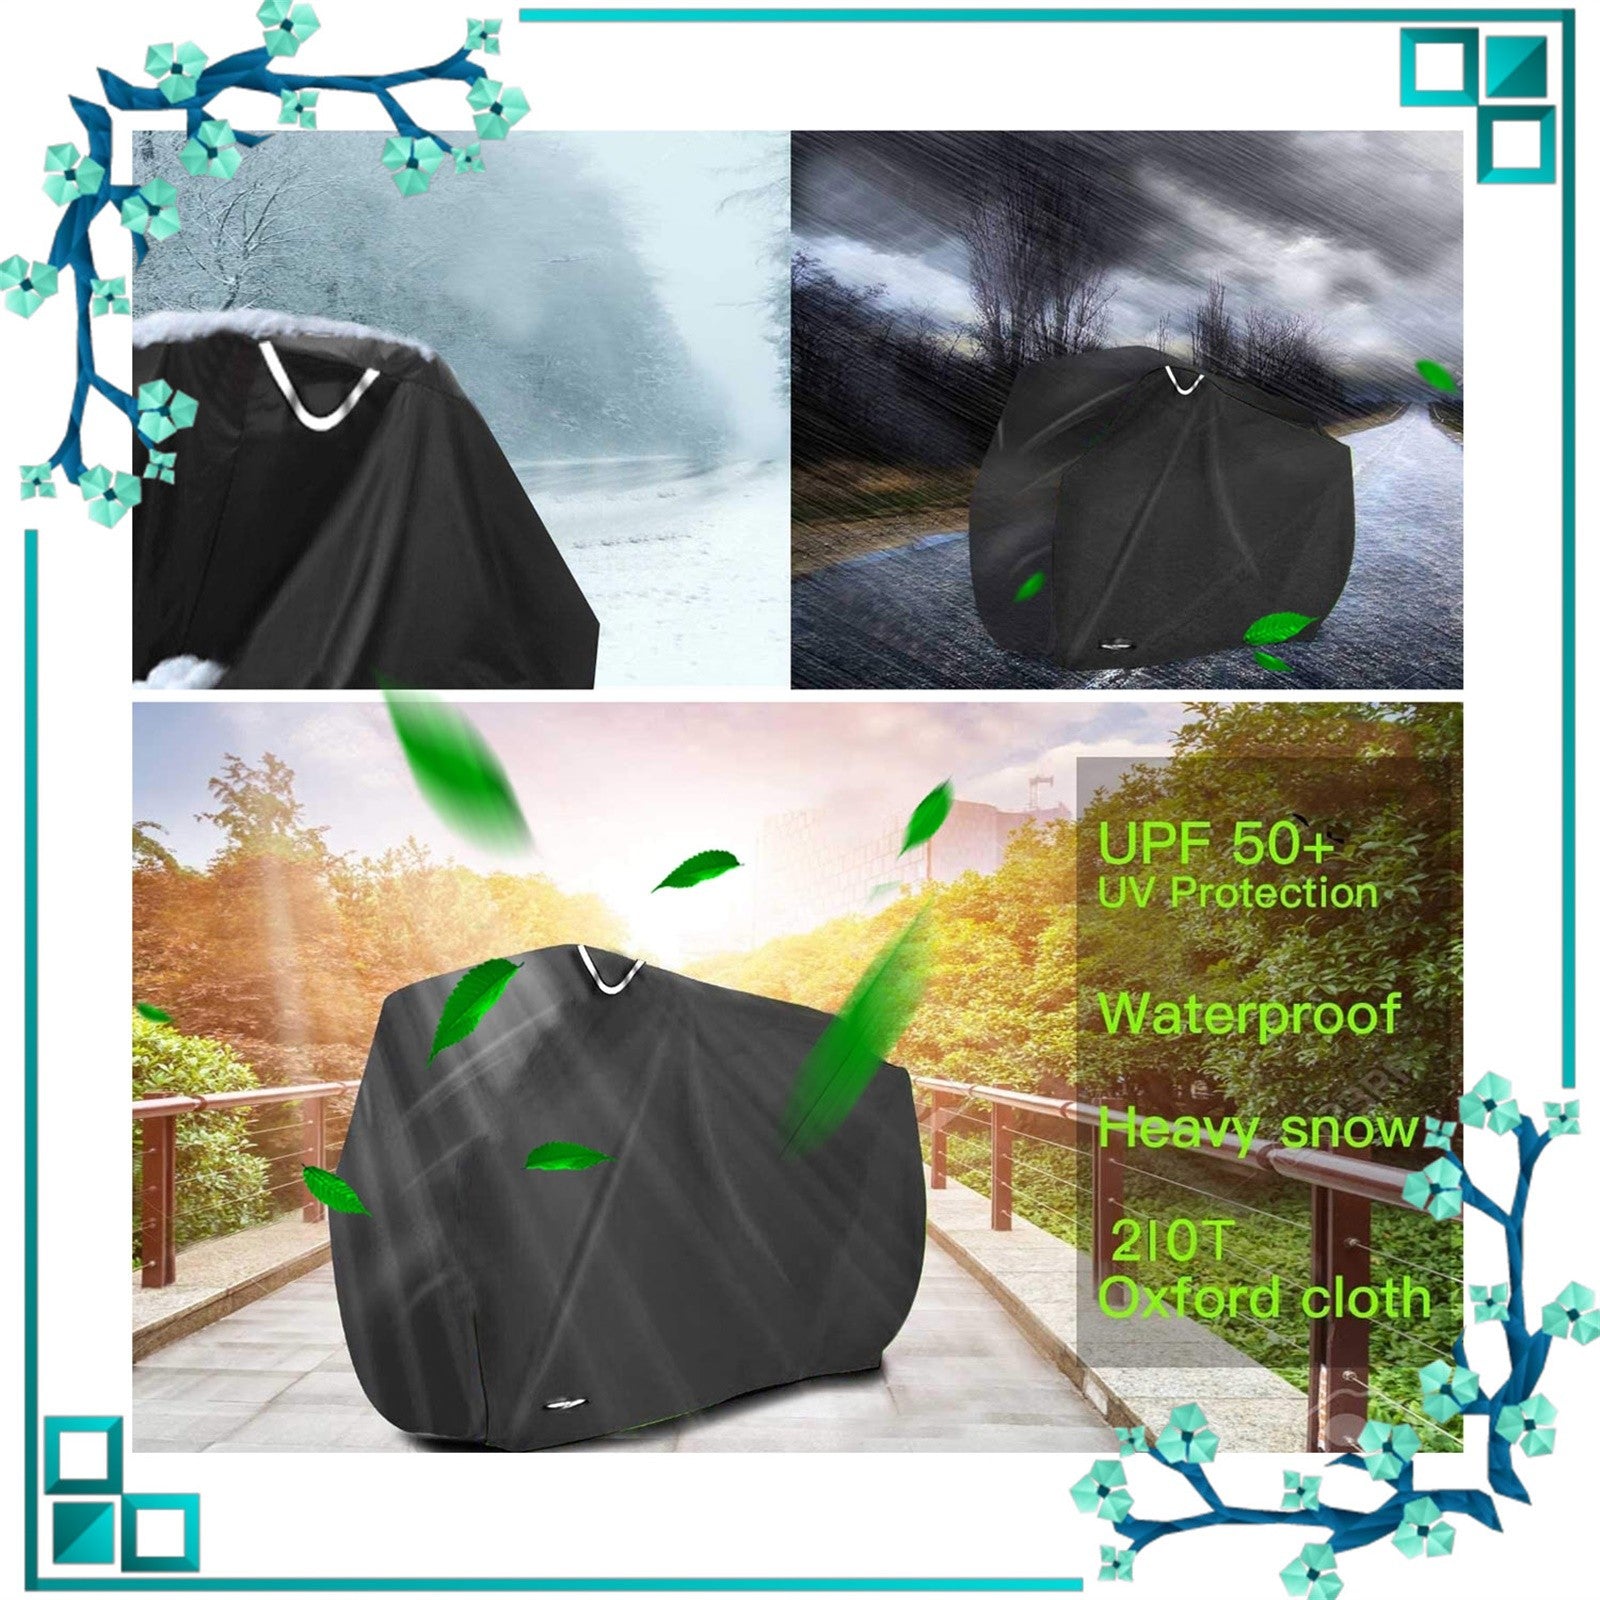 Smabike Bicycle Protective Gear Waterproof Bike Cover Outdoor Sunshade Dustproof Sunshine Cover 2 Bike Outer Cover